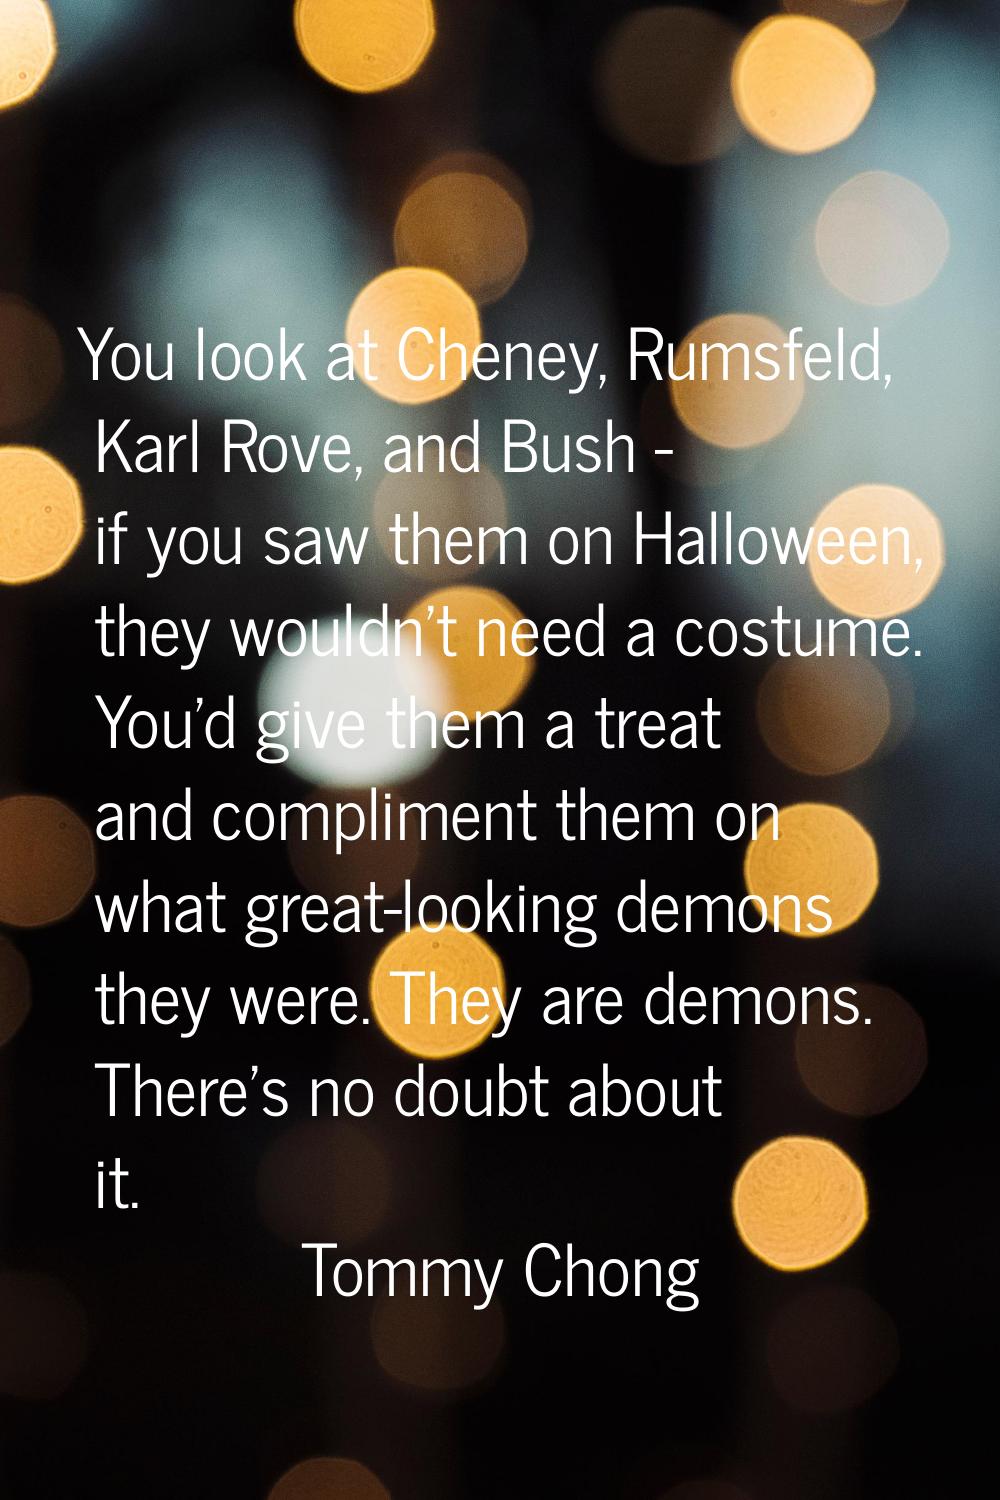 You look at Cheney, Rumsfeld, Karl Rove, and Bush - if you saw them on Halloween, they wouldn't nee